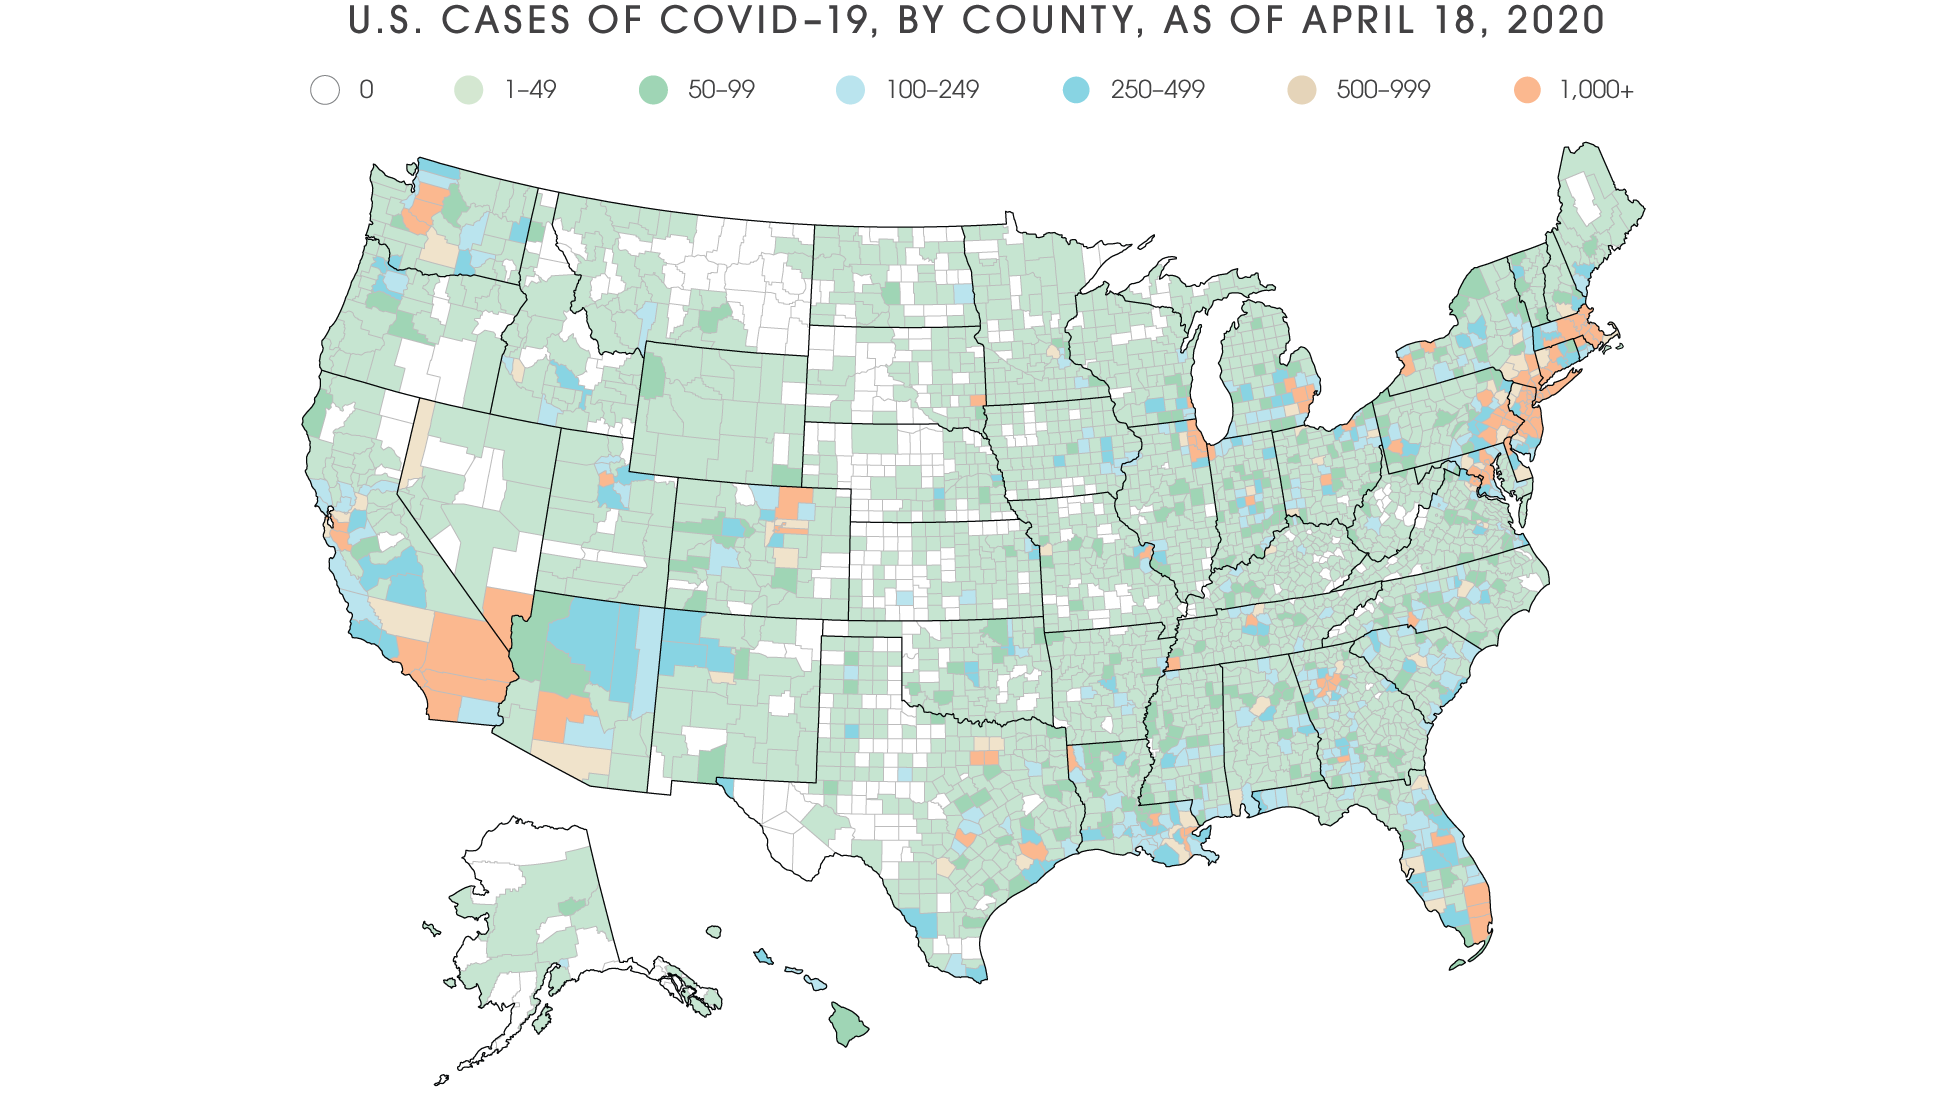 U.S. CASES OF COVID–19, BY COUNTY, AS OF APRIL 18, 2020